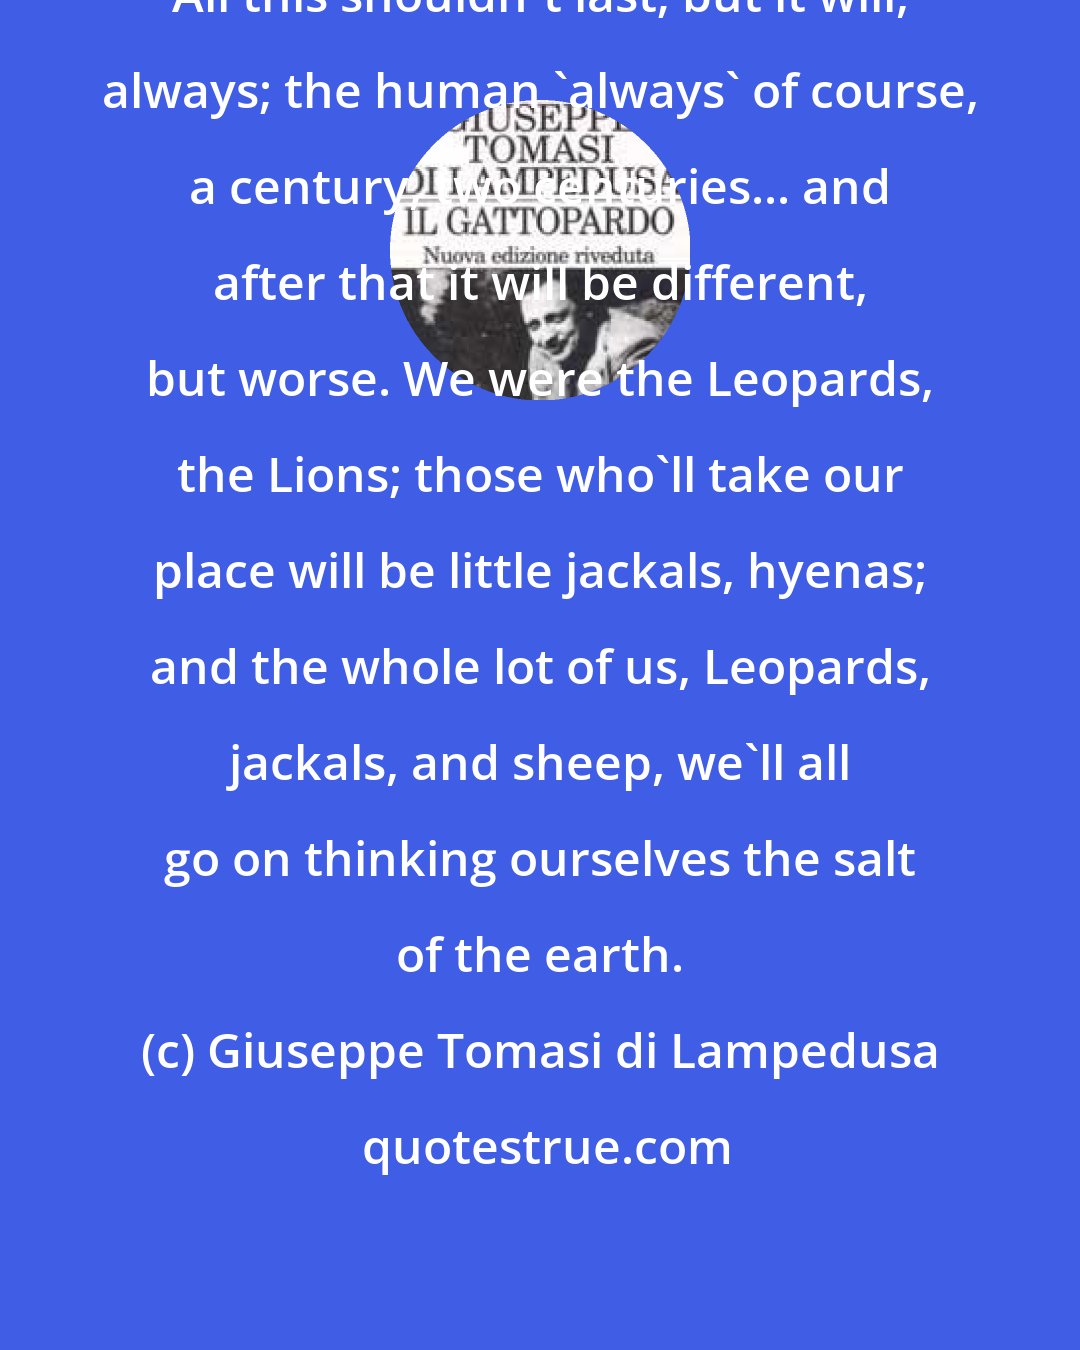 Giuseppe Tomasi di Lampedusa: All this shouldn't last; but it will, always; the human 'always' of course, a century, two centuries... and after that it will be different, but worse. We were the Leopards, the Lions; those who'll take our place will be little jackals, hyenas; and the whole lot of us, Leopards, jackals, and sheep, we'll all go on thinking ourselves the salt of the earth.